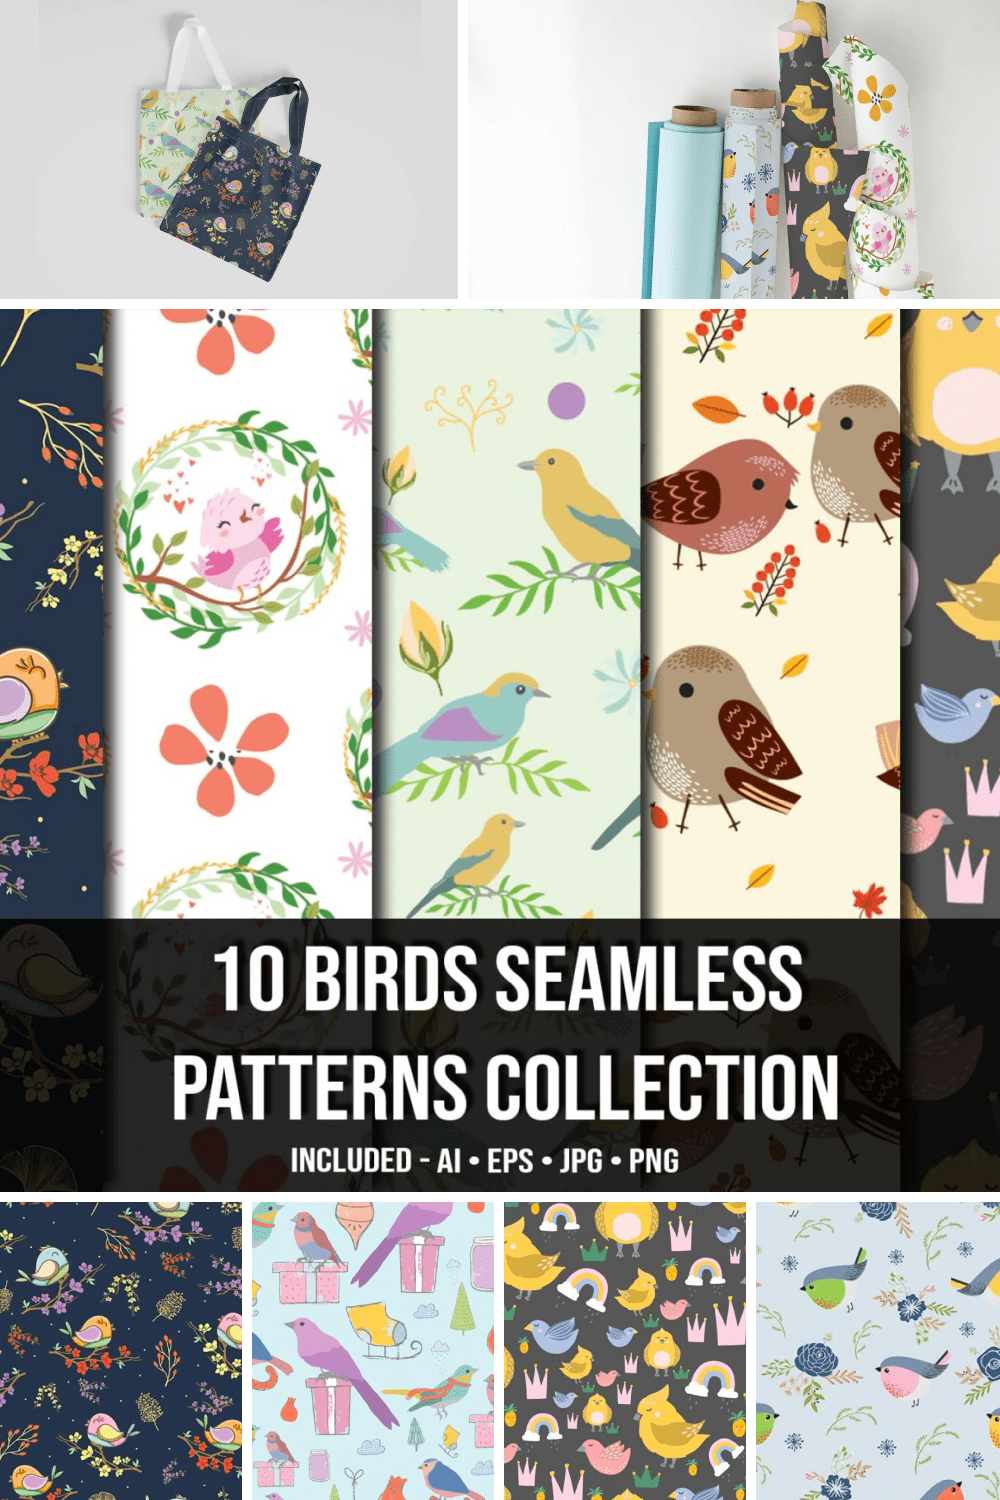 This collection is like a piece of art. Such birds were depicted in ancient China on porcelain.